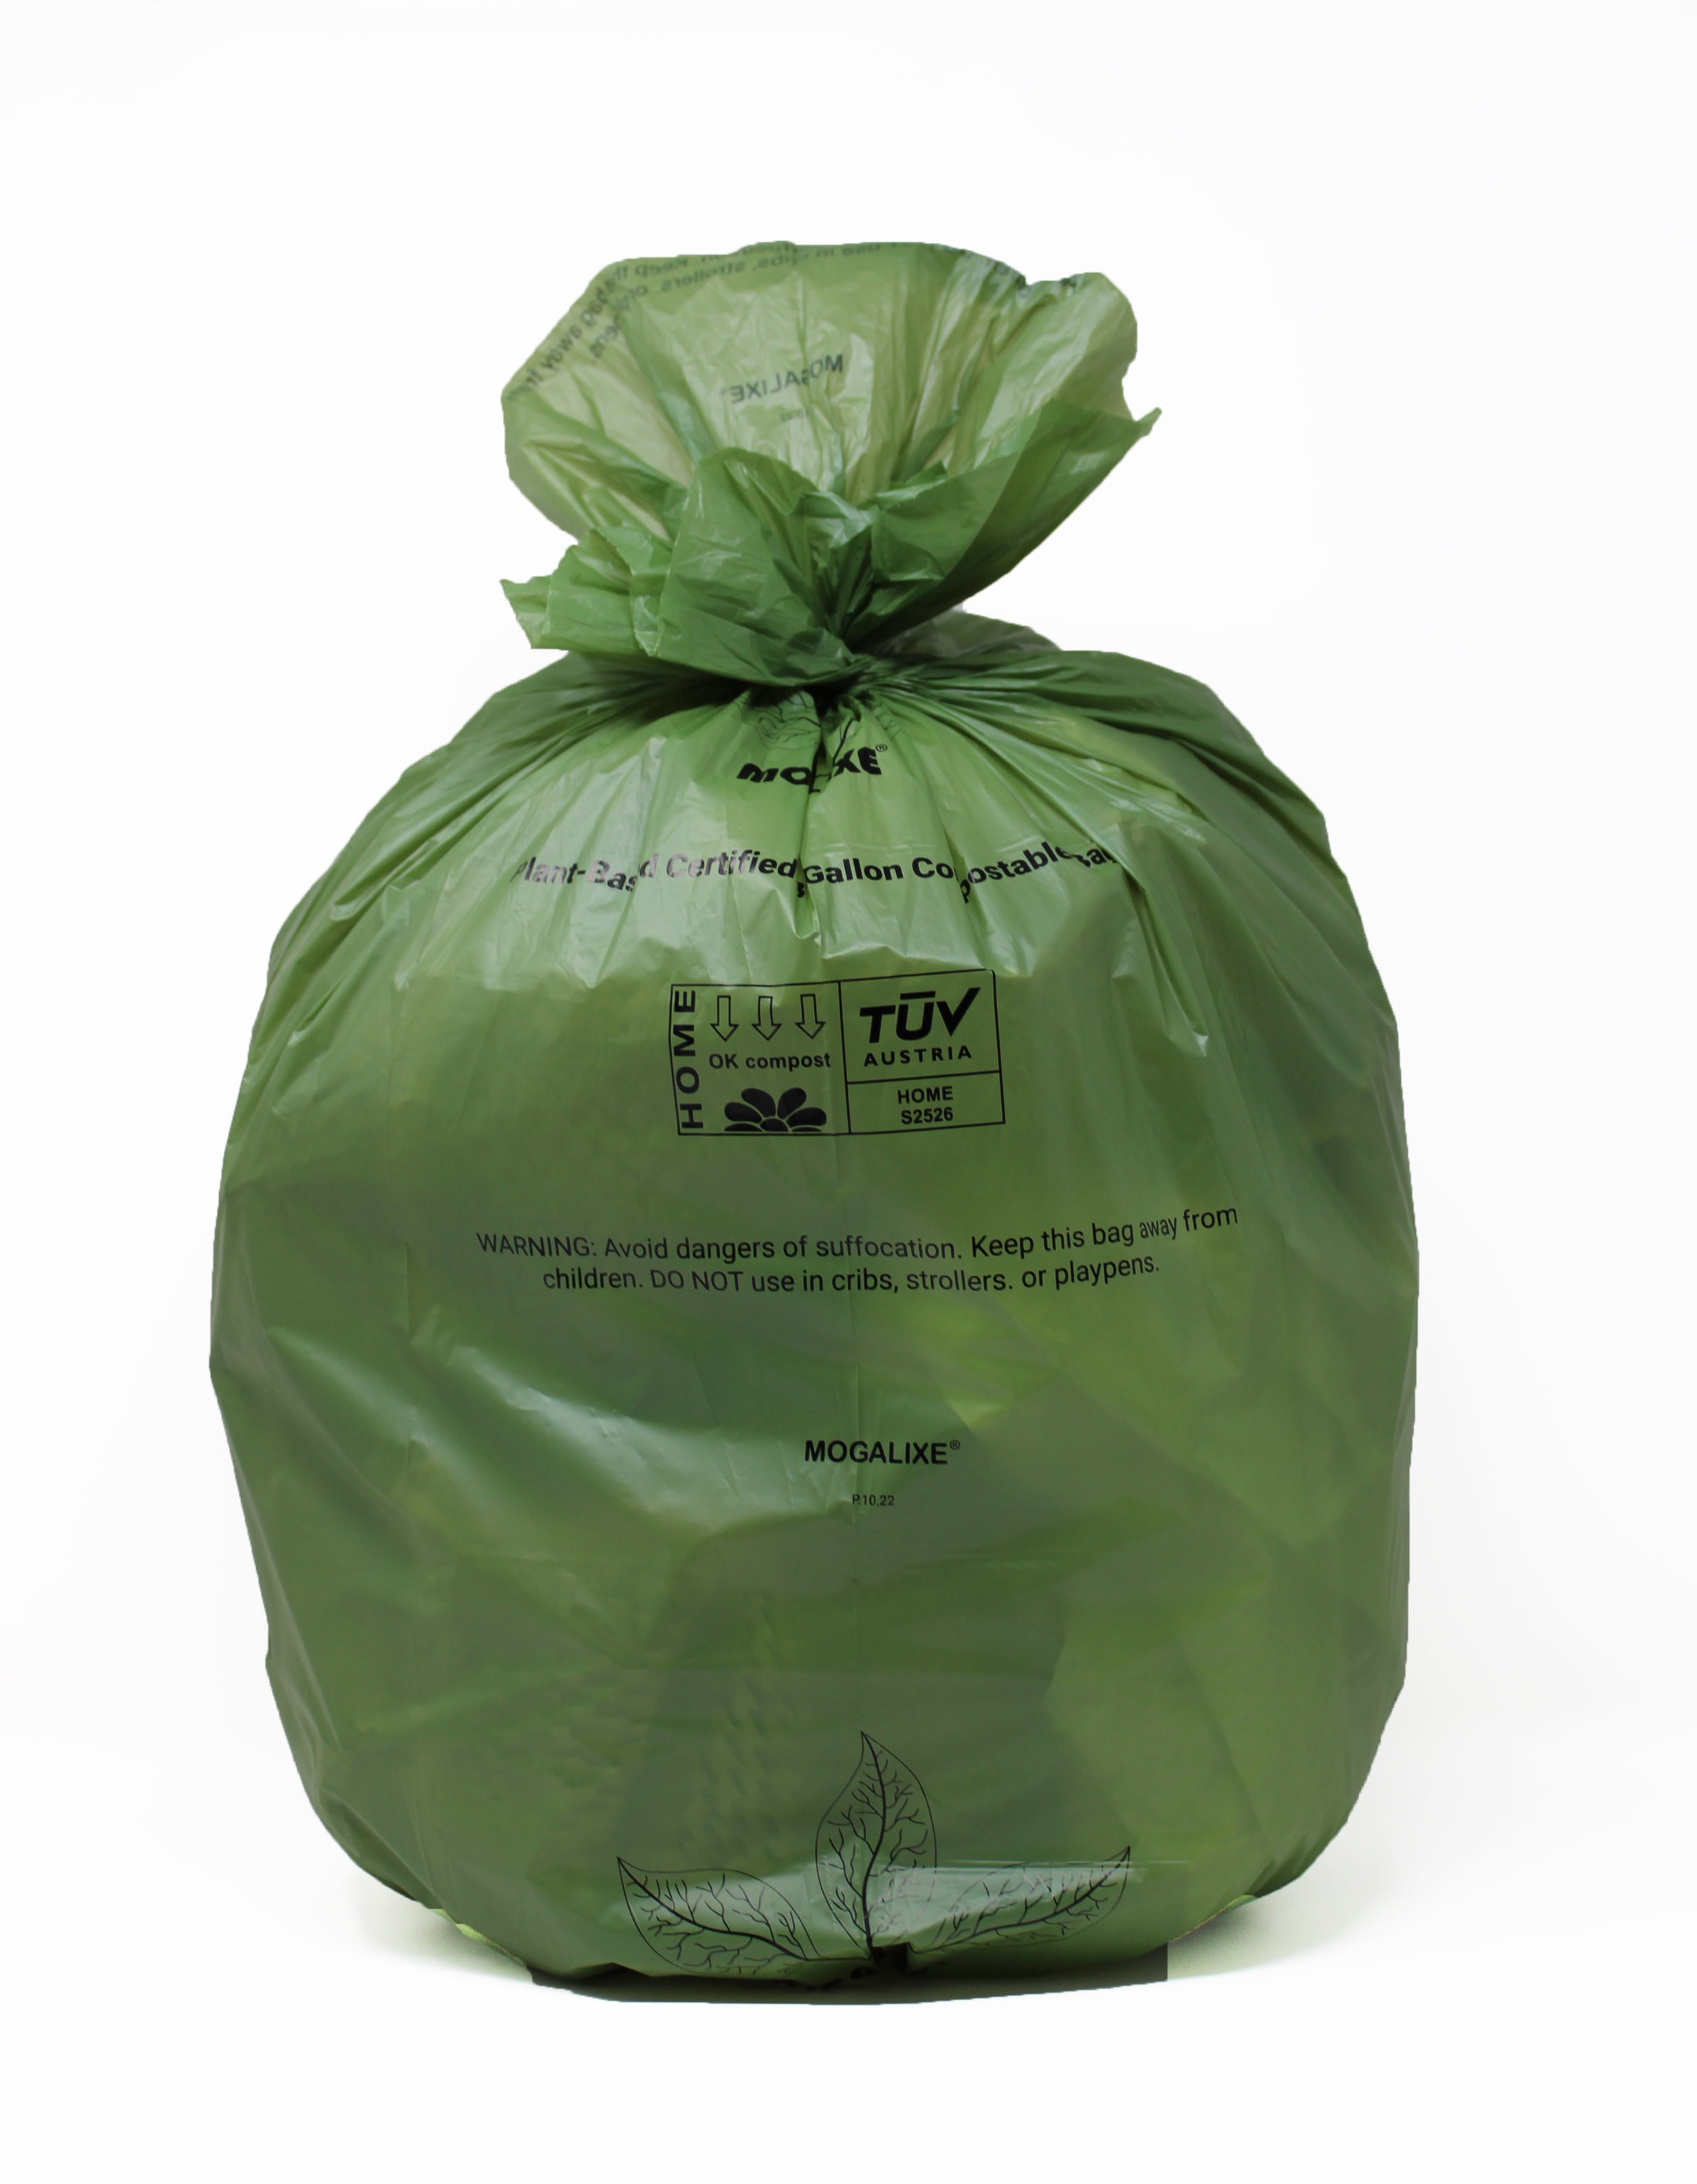 Wholesale Forid Compostable Bags Manufacturer and Supplier